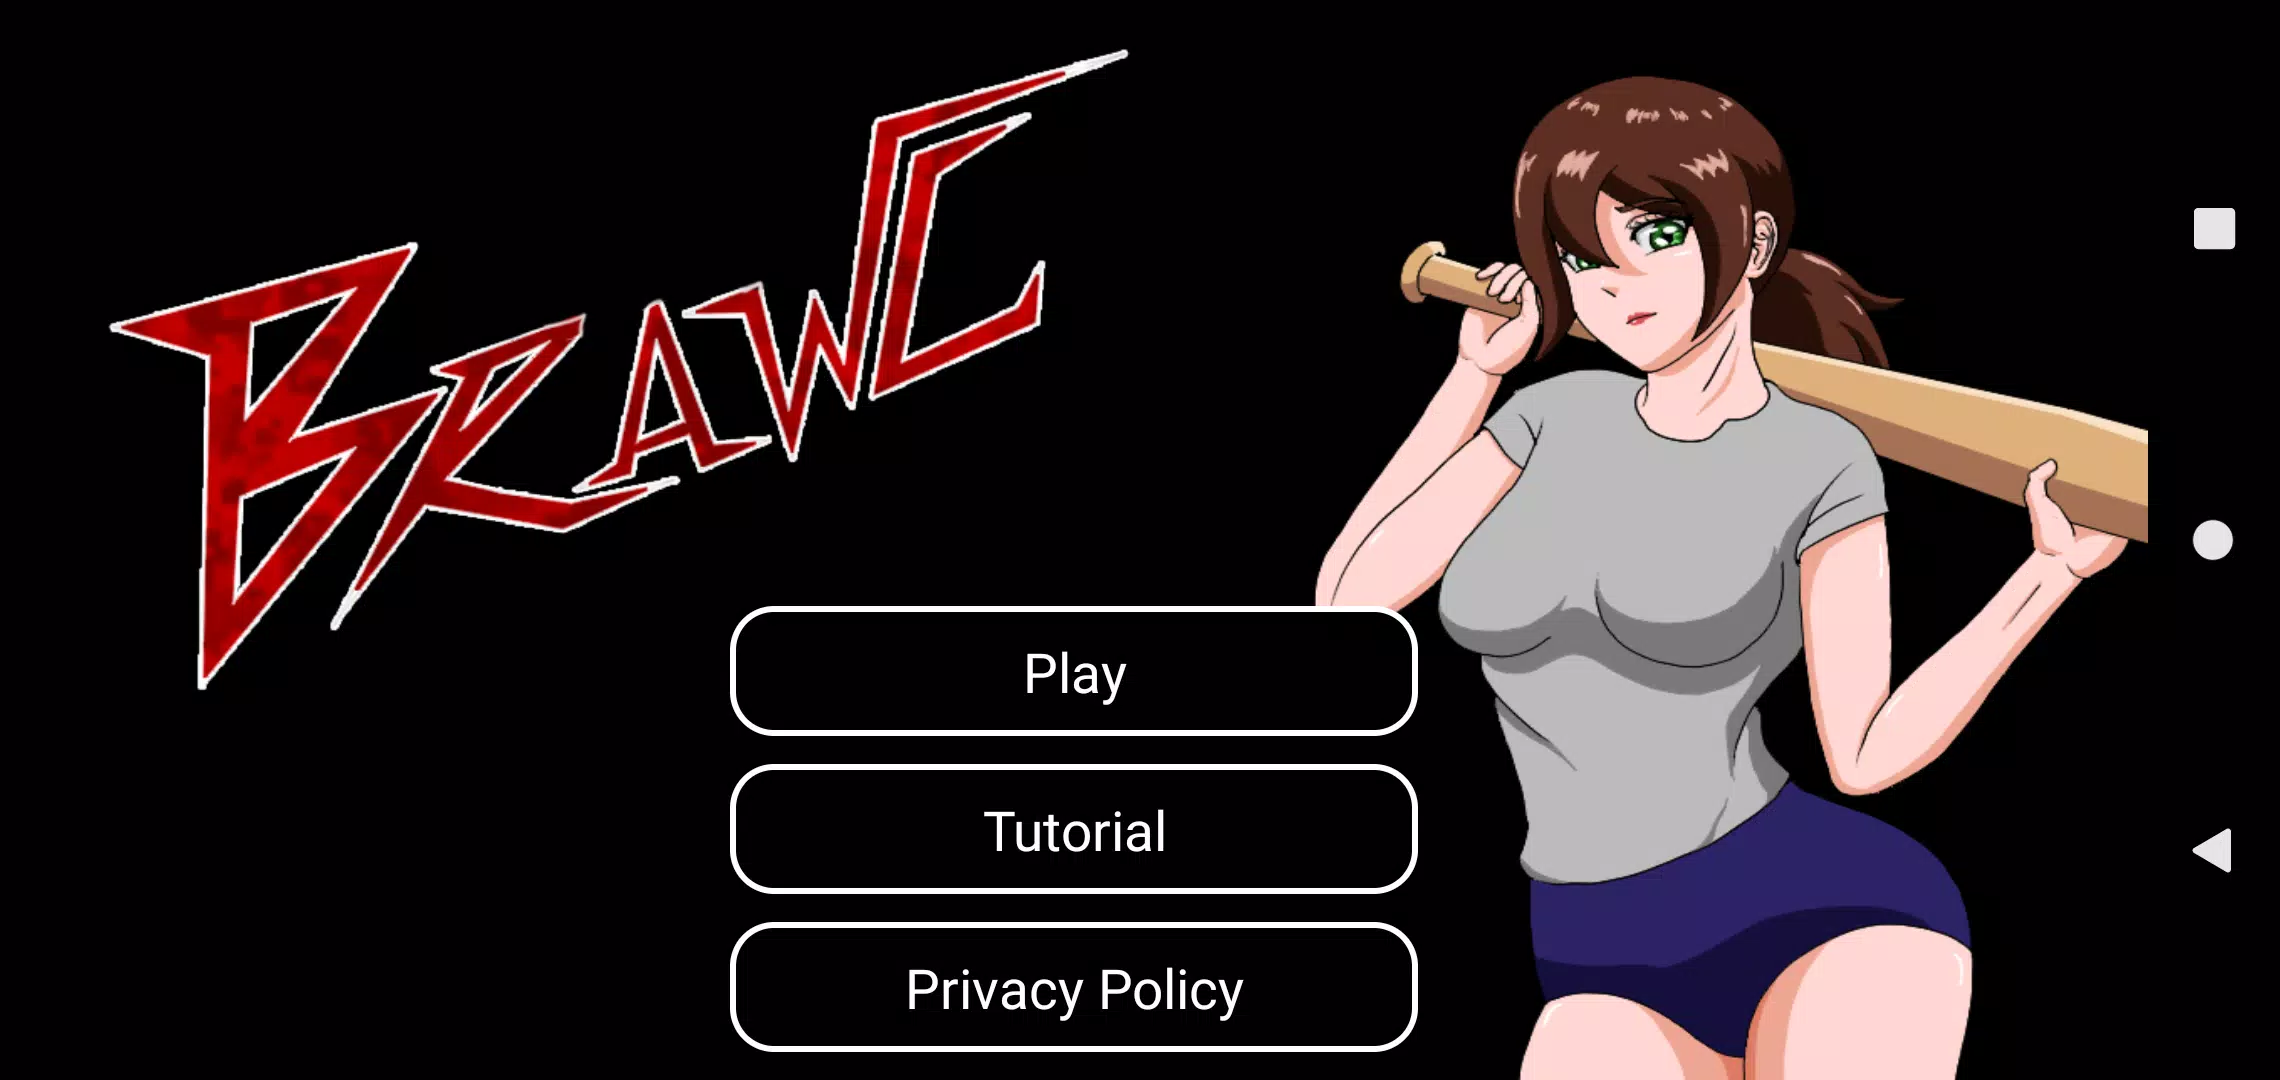 College Brawl Play Guide APK for Android Download